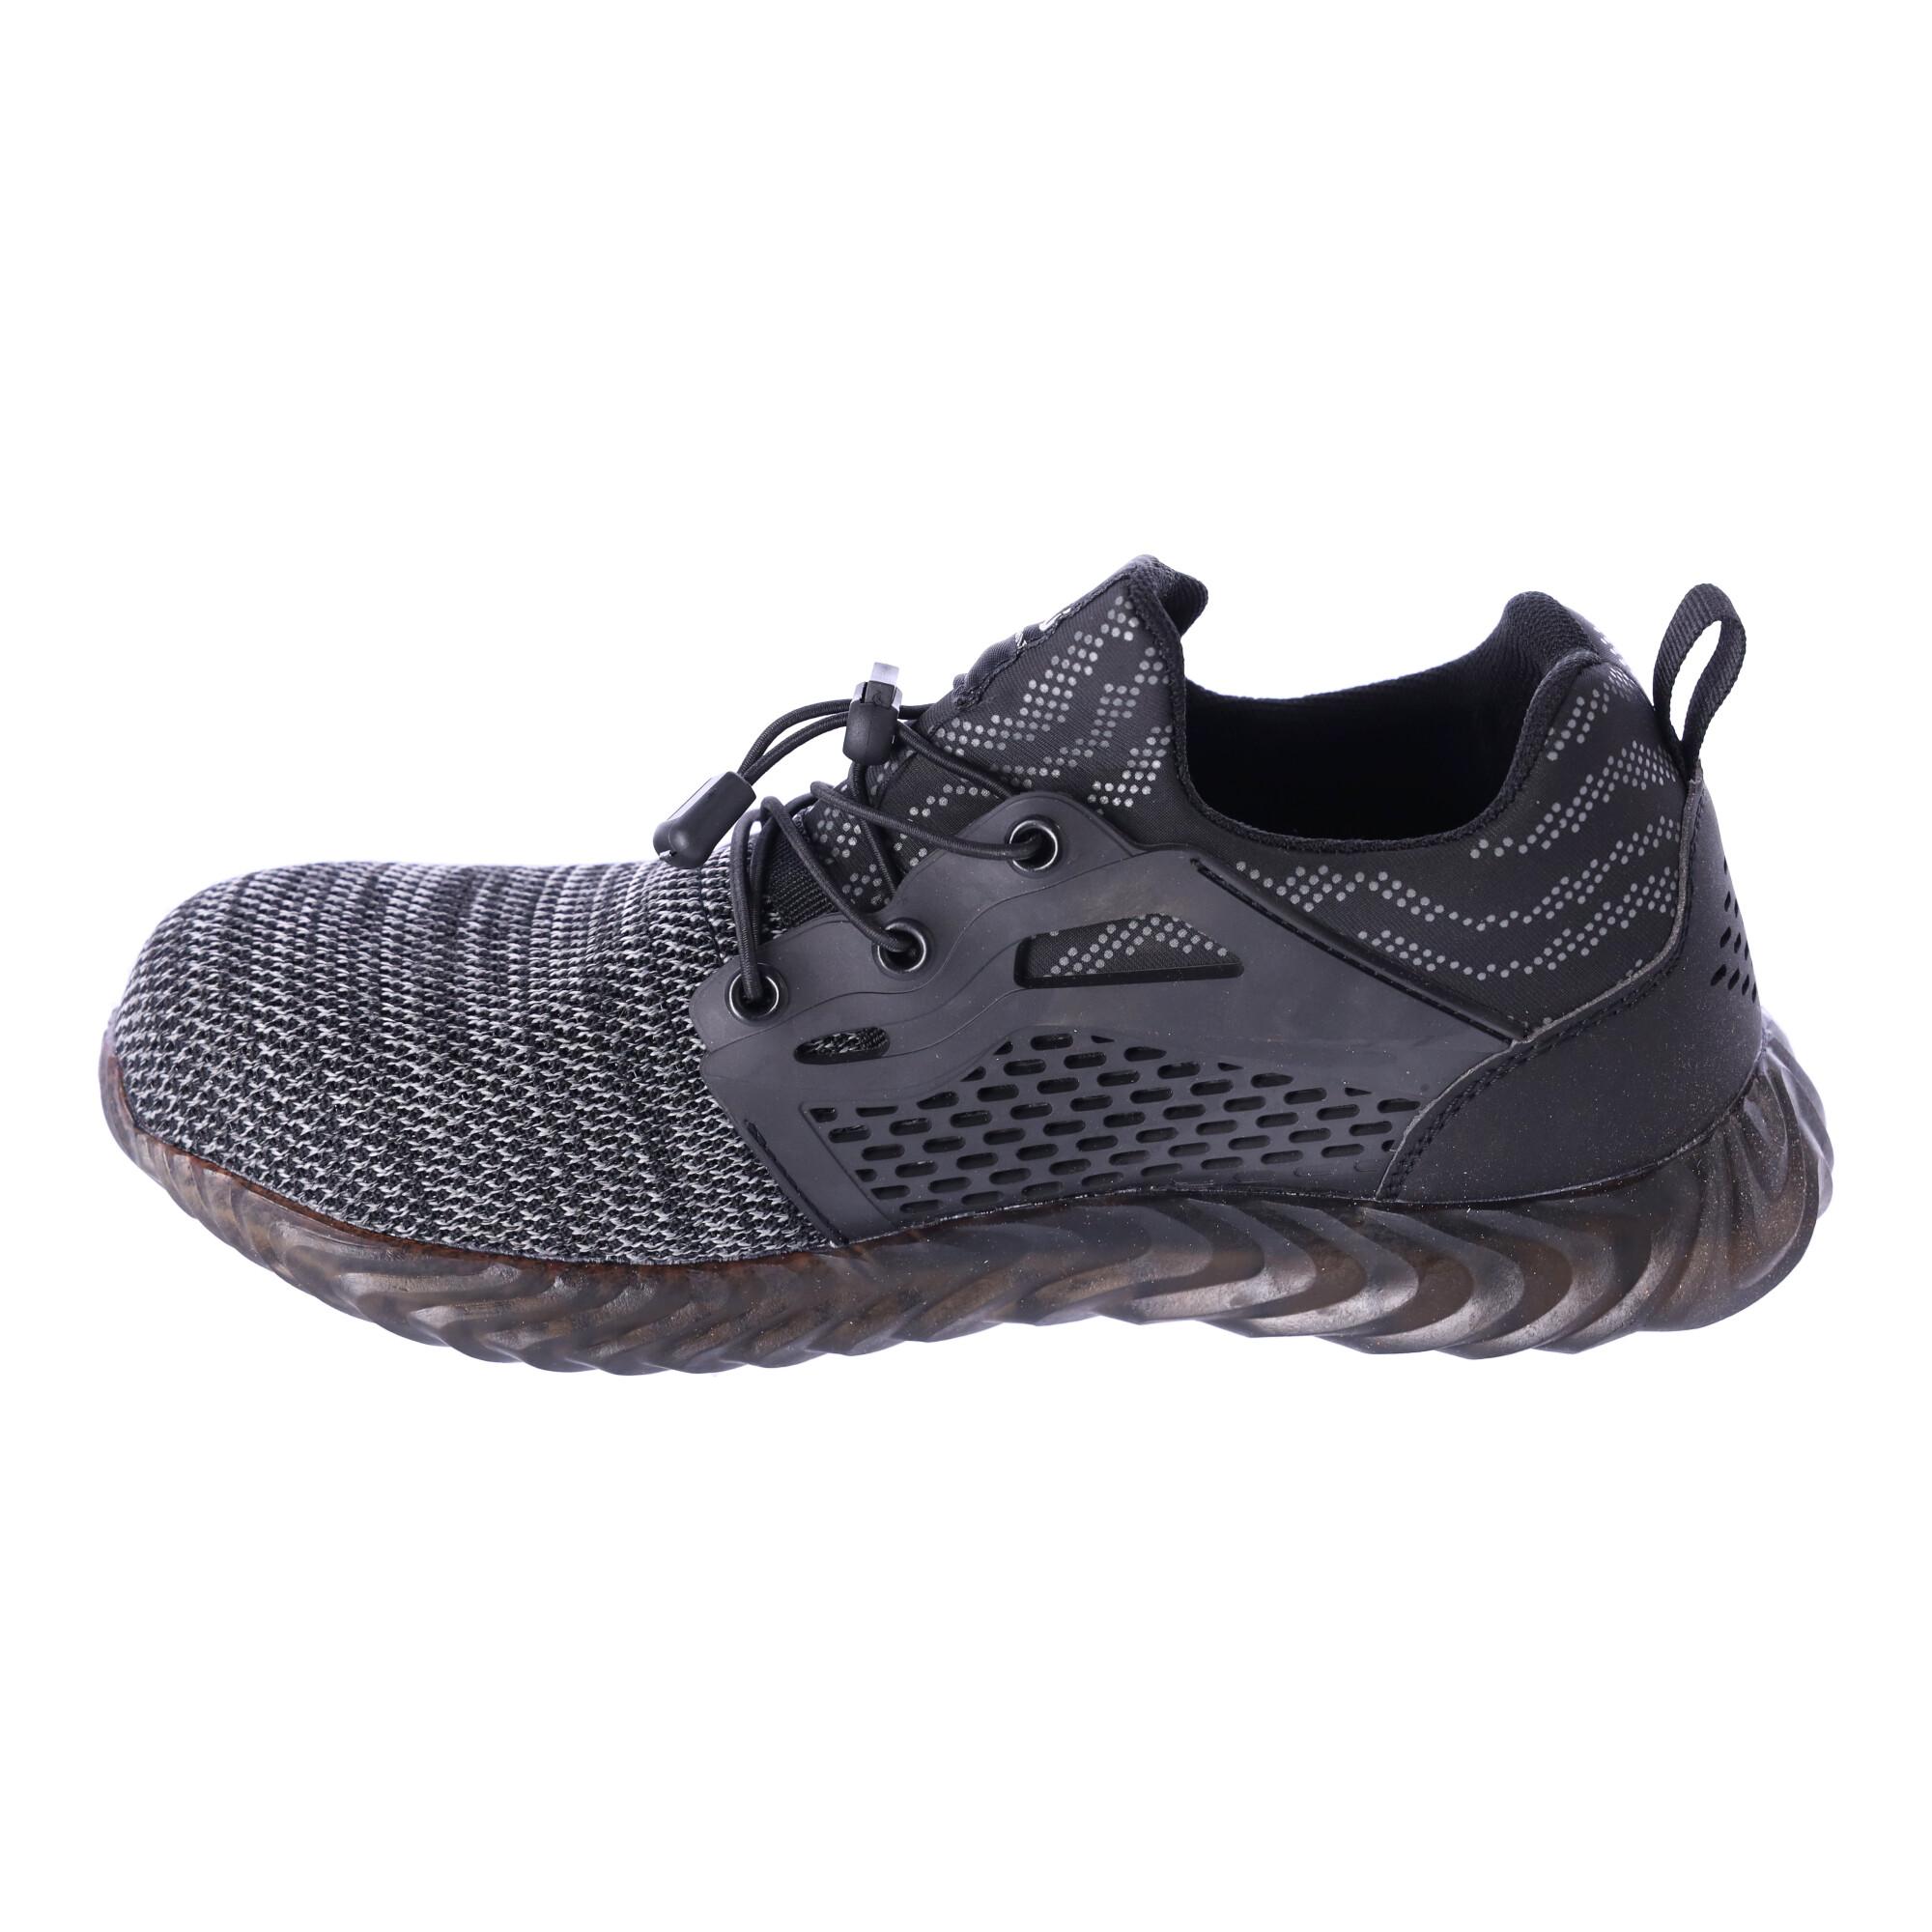 Work safety shoes "44" - gray